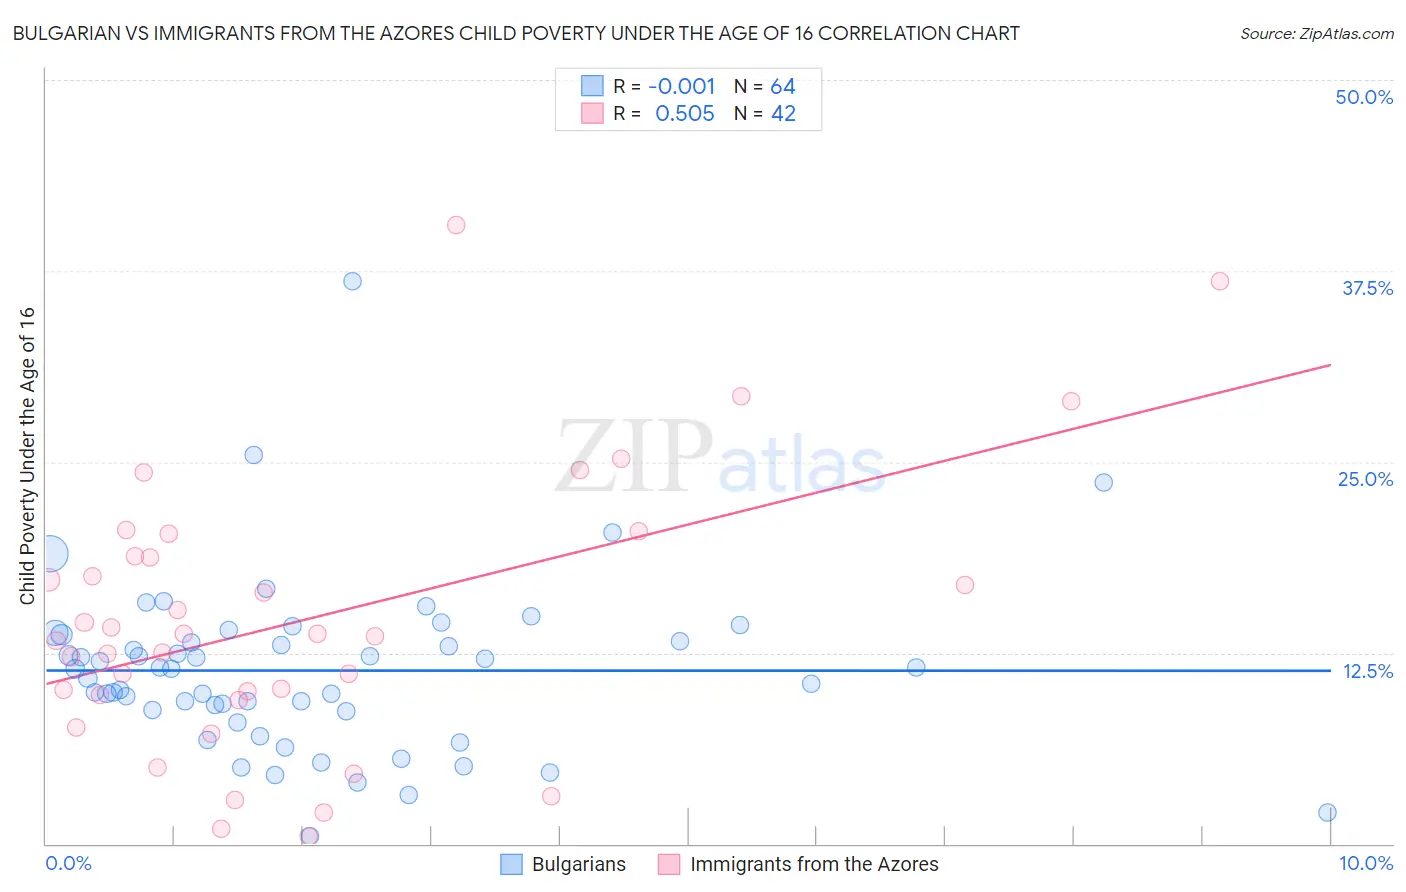 Bulgarian vs Immigrants from the Azores Child Poverty Under the Age of 16